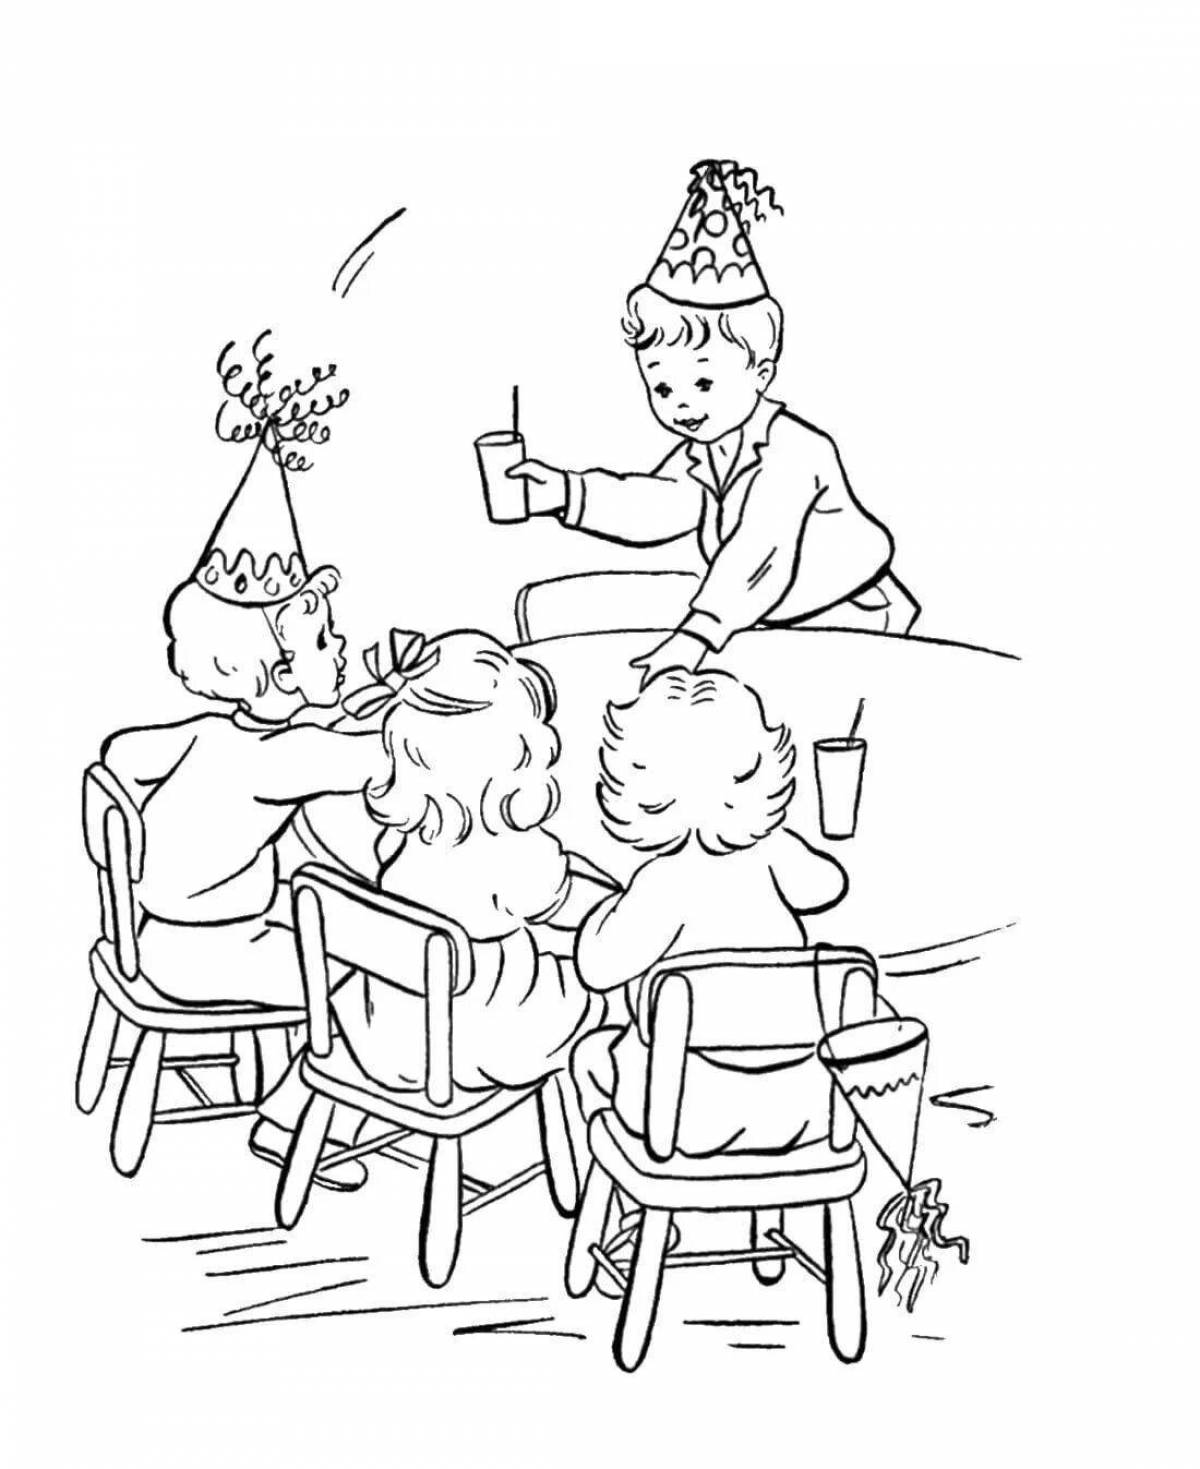 Etiquette for children 4 5 years old #14